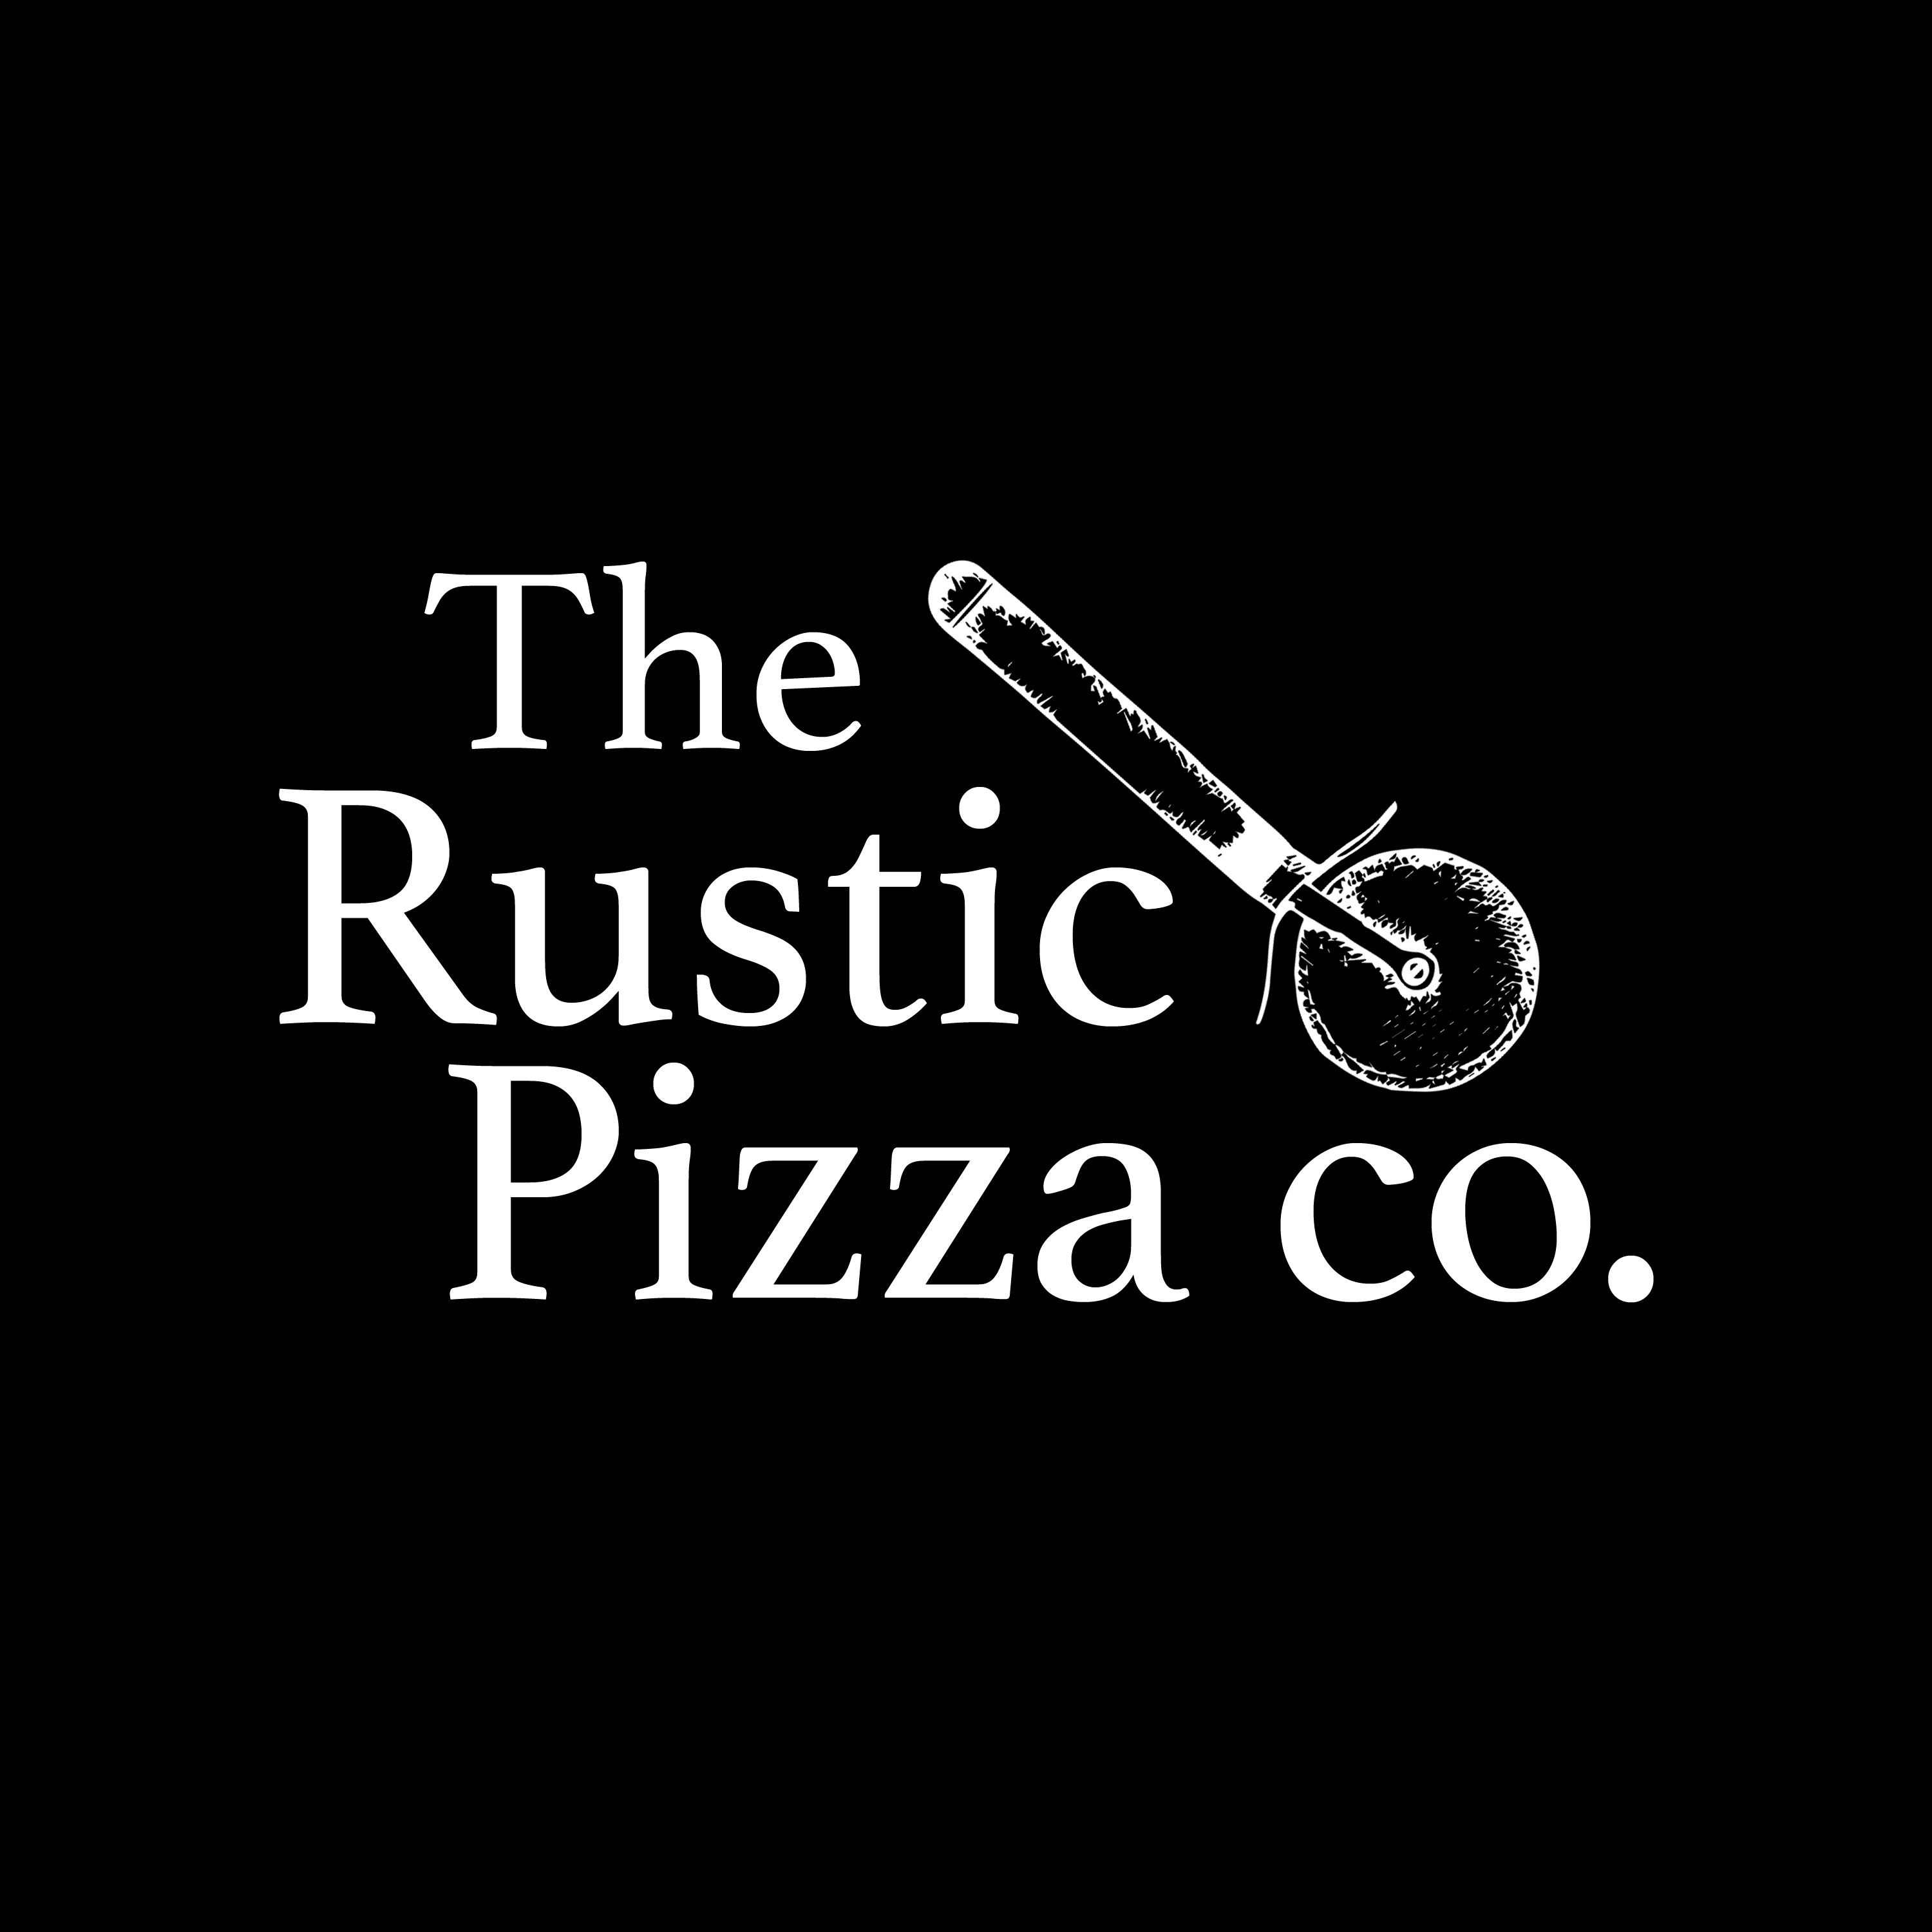 The Rustic Pizza Co